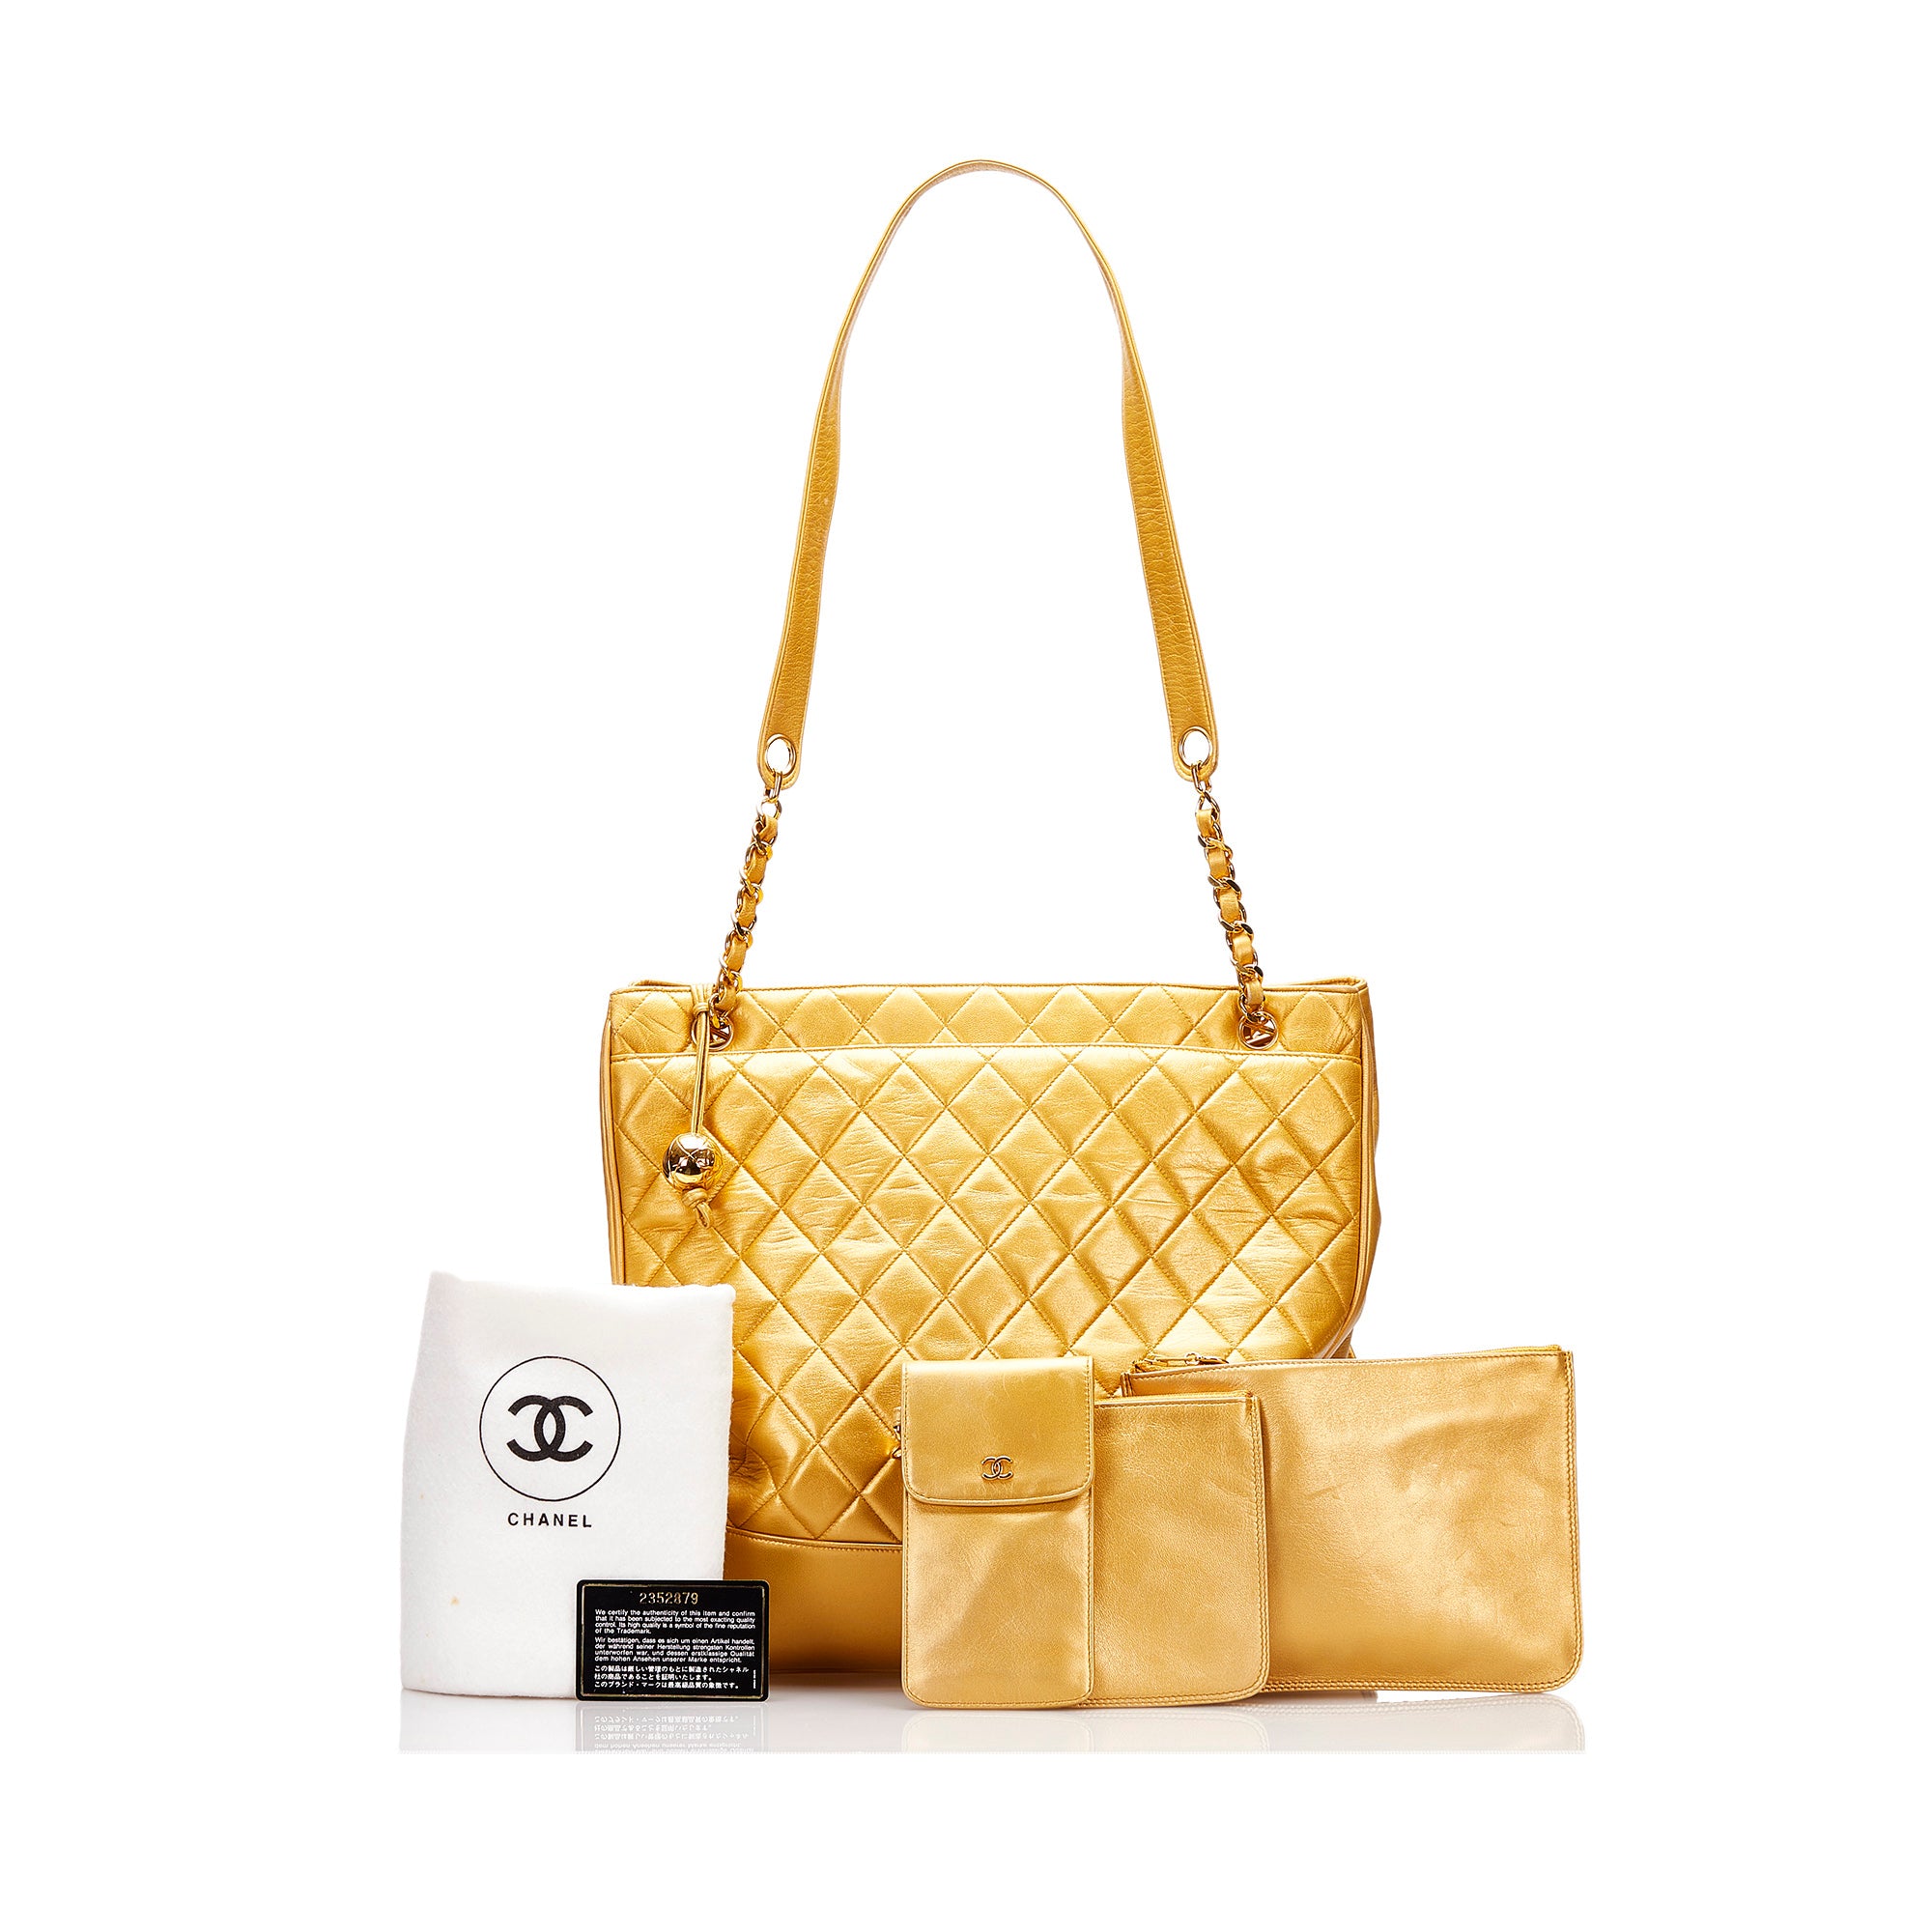 CHANEL Chanel Vintage Quilted Tote Metallic Gold - Vault 55